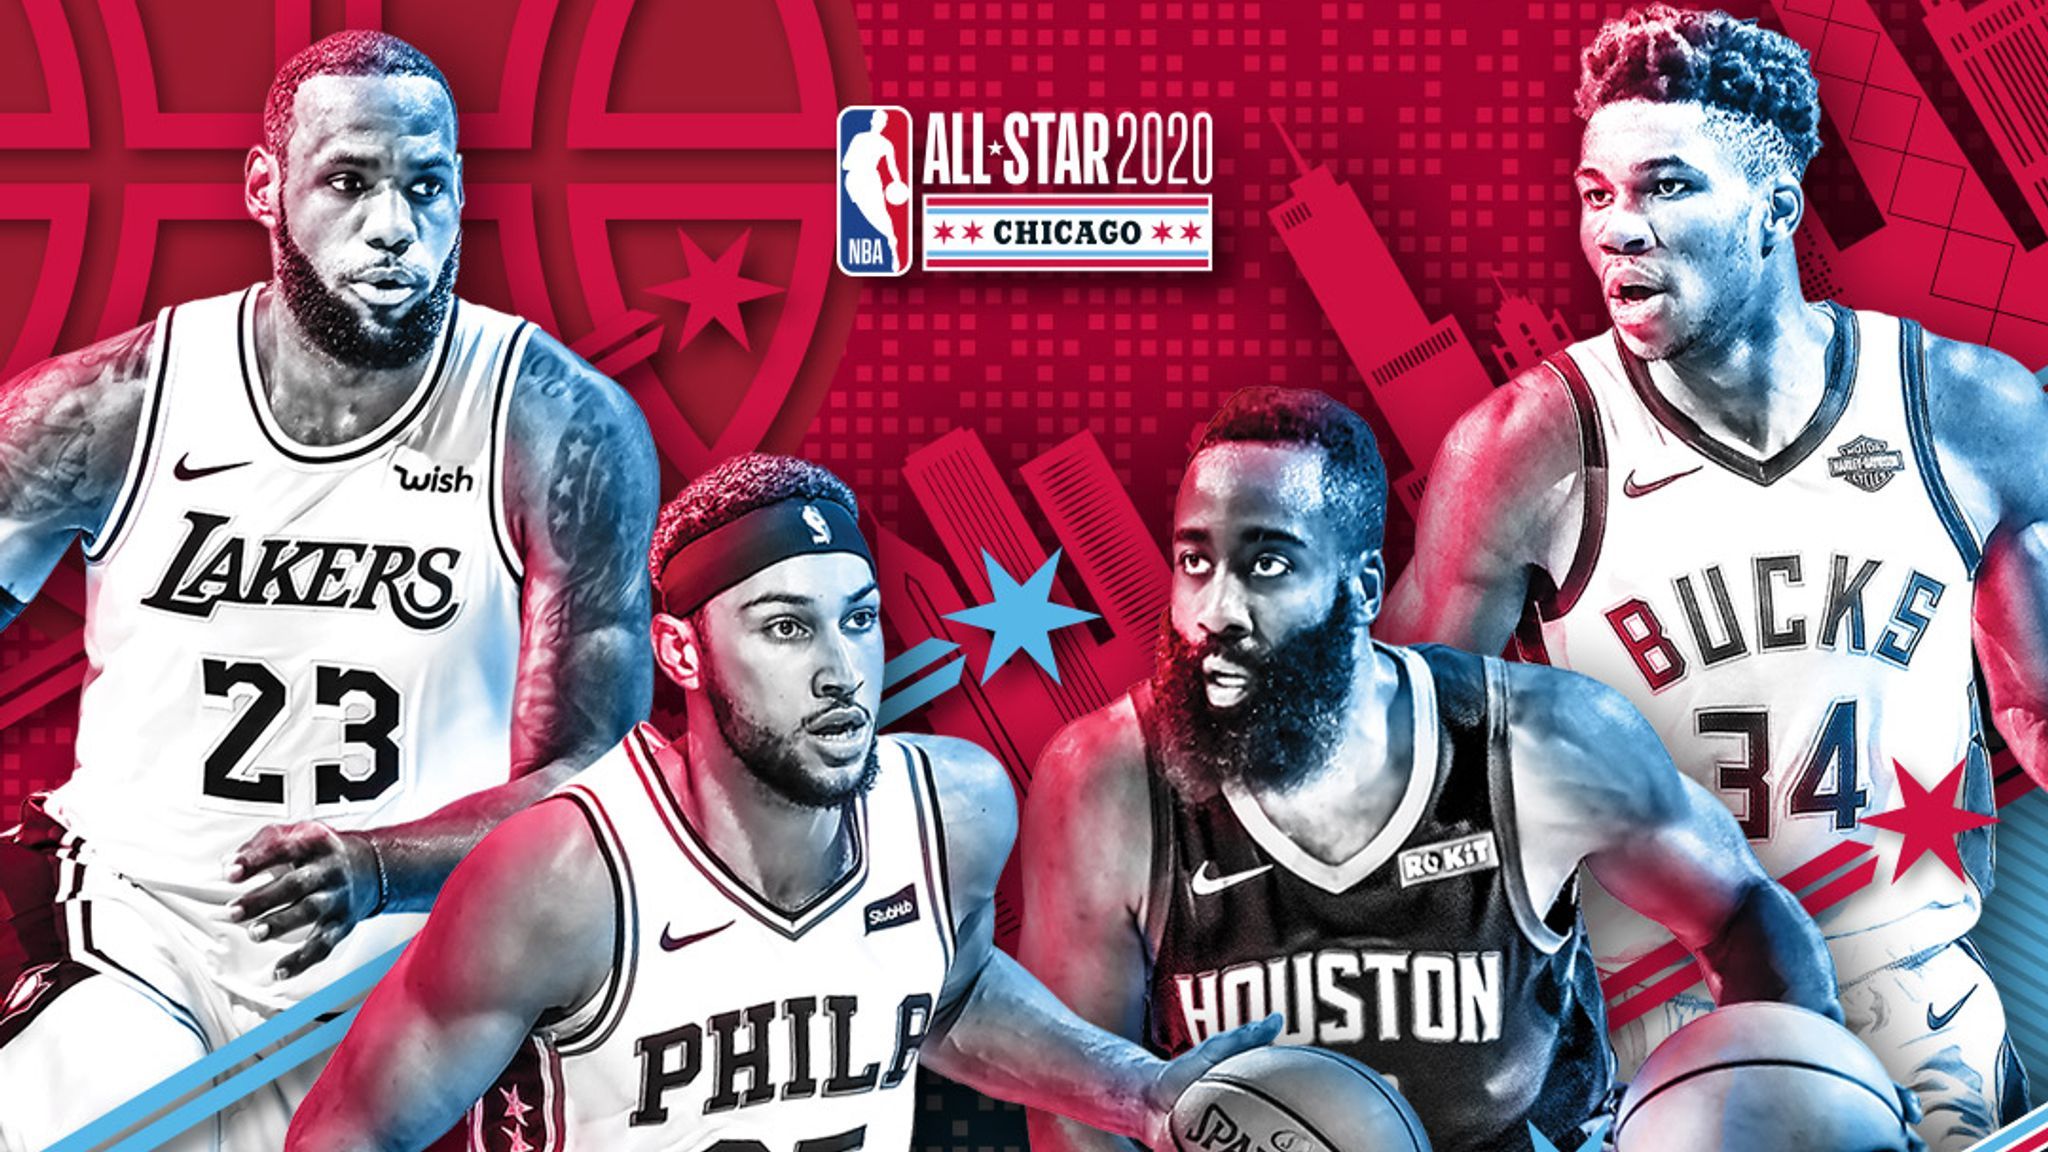 All Star 2020: LeBron James And Giannis Antetokounmpo Pick Squads Live On Sky Sports